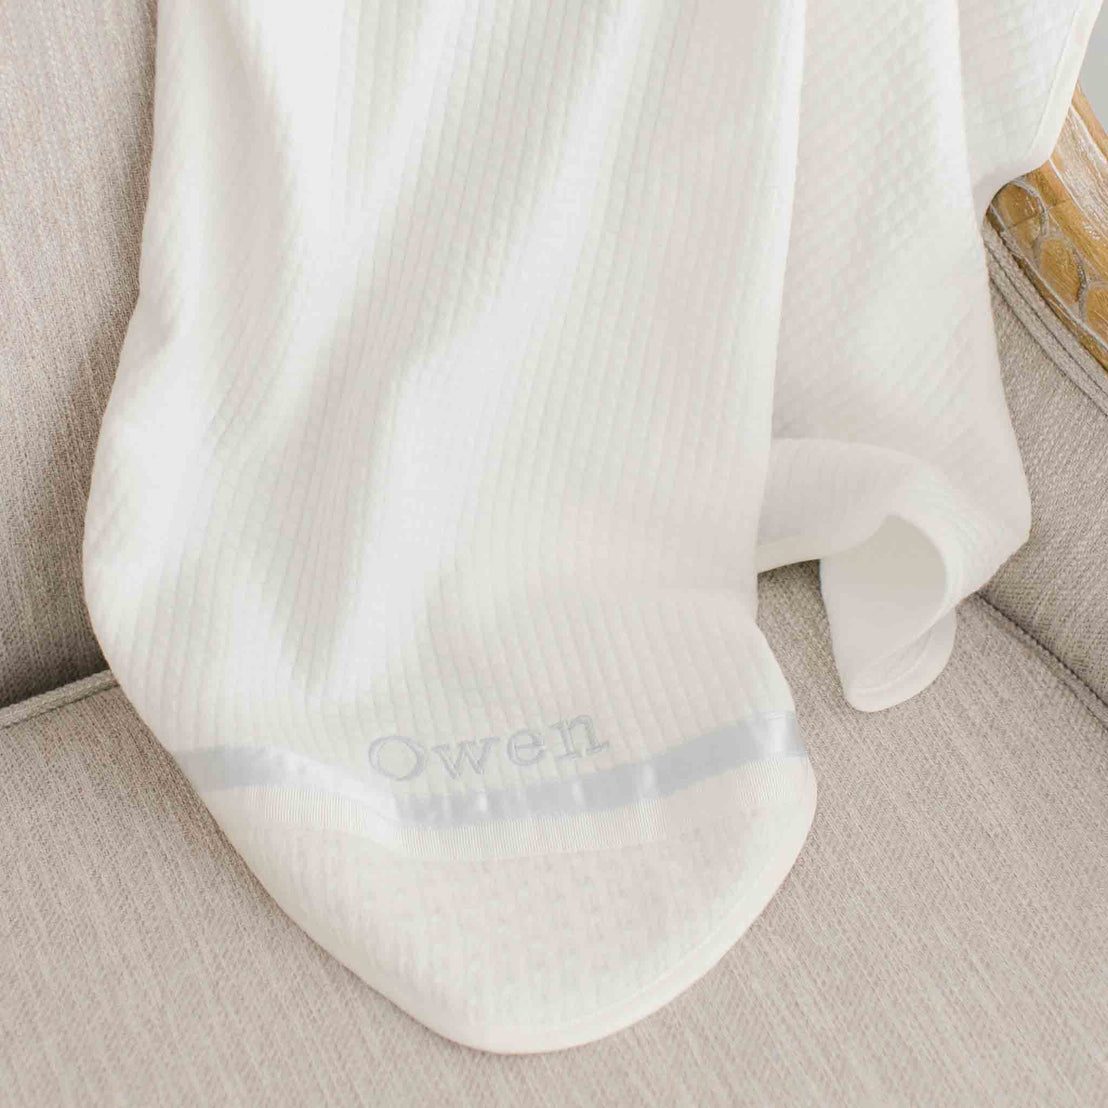 Photo of the corner of the Owen Personalized Blanket. The corner features an ivory knit and the name "Owen" embroidered with light blue thread